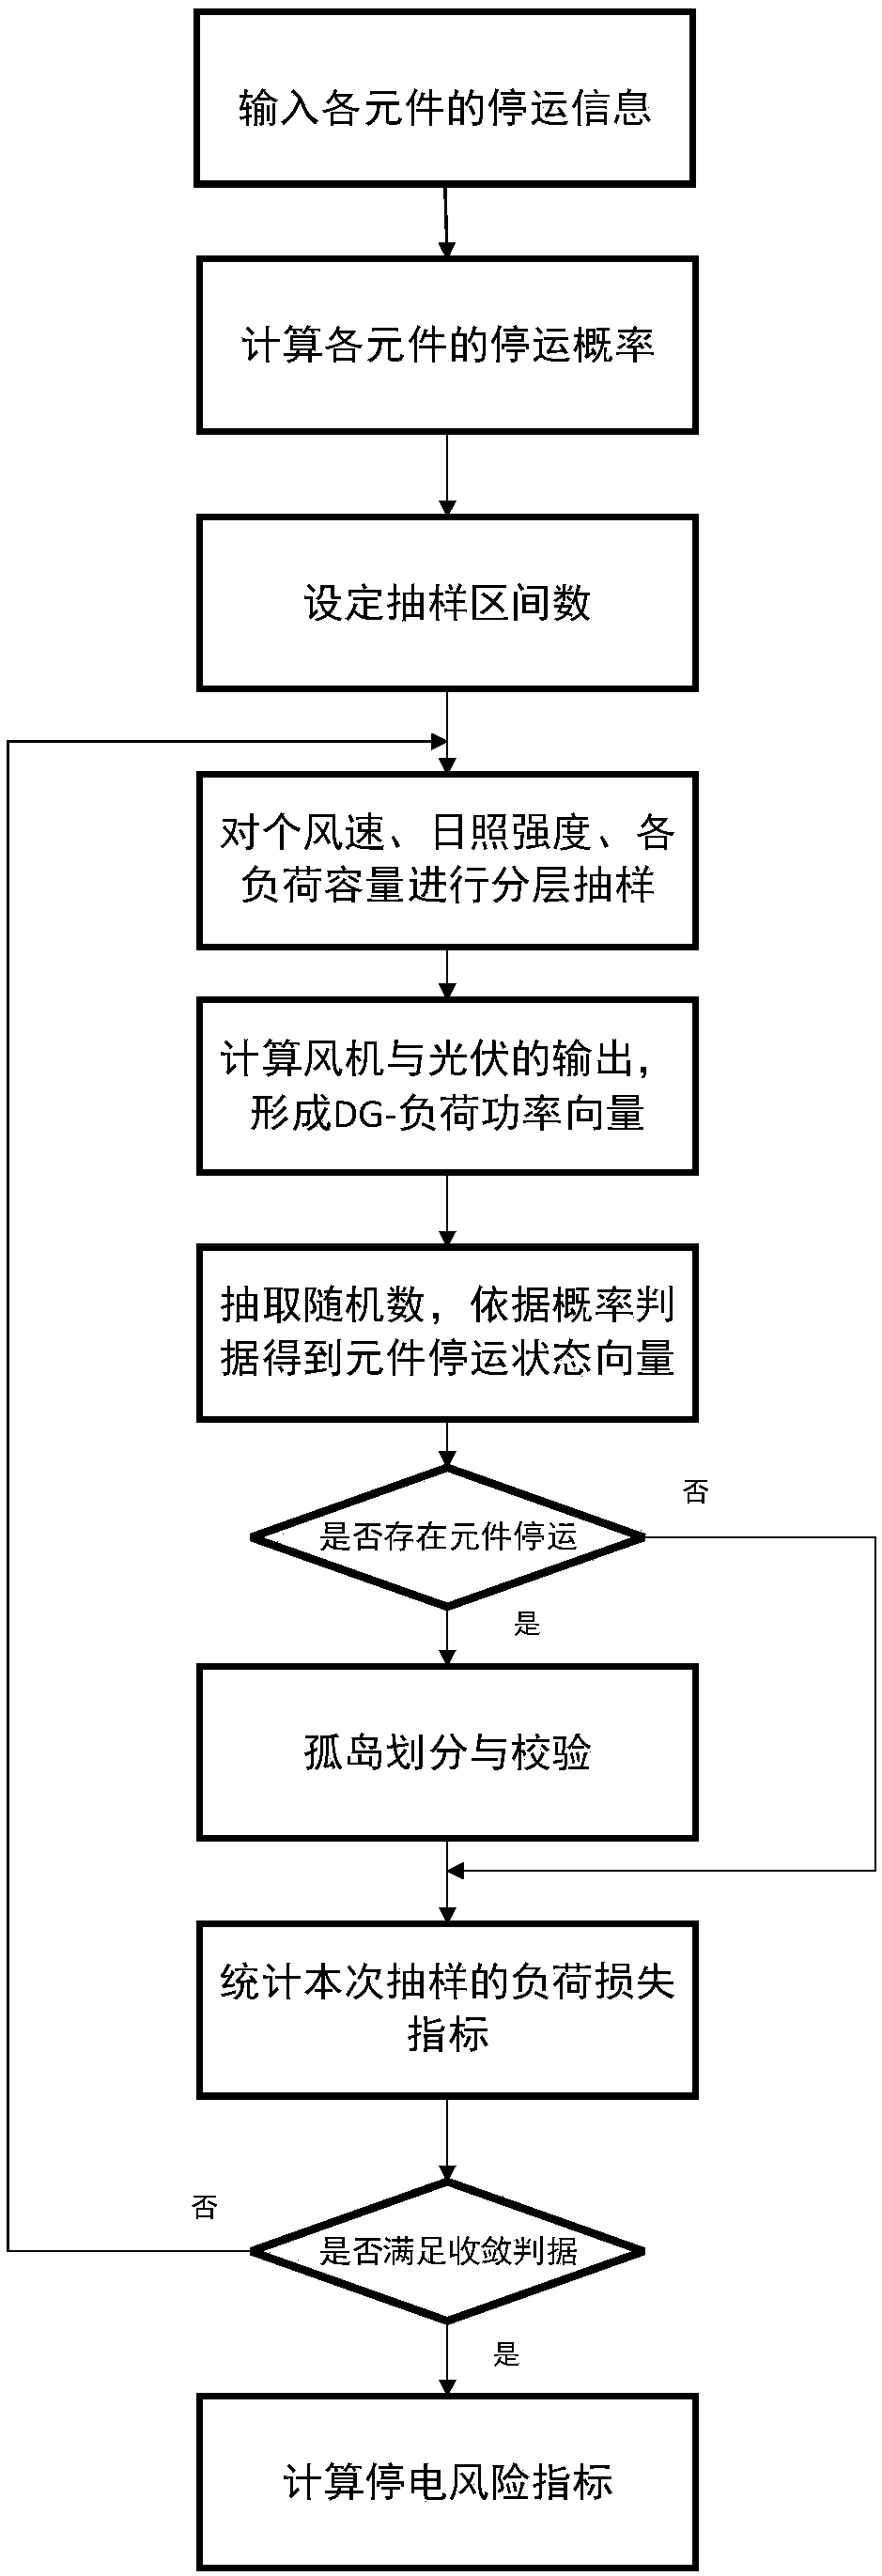 A power distribution network power failure risk assessment method and system